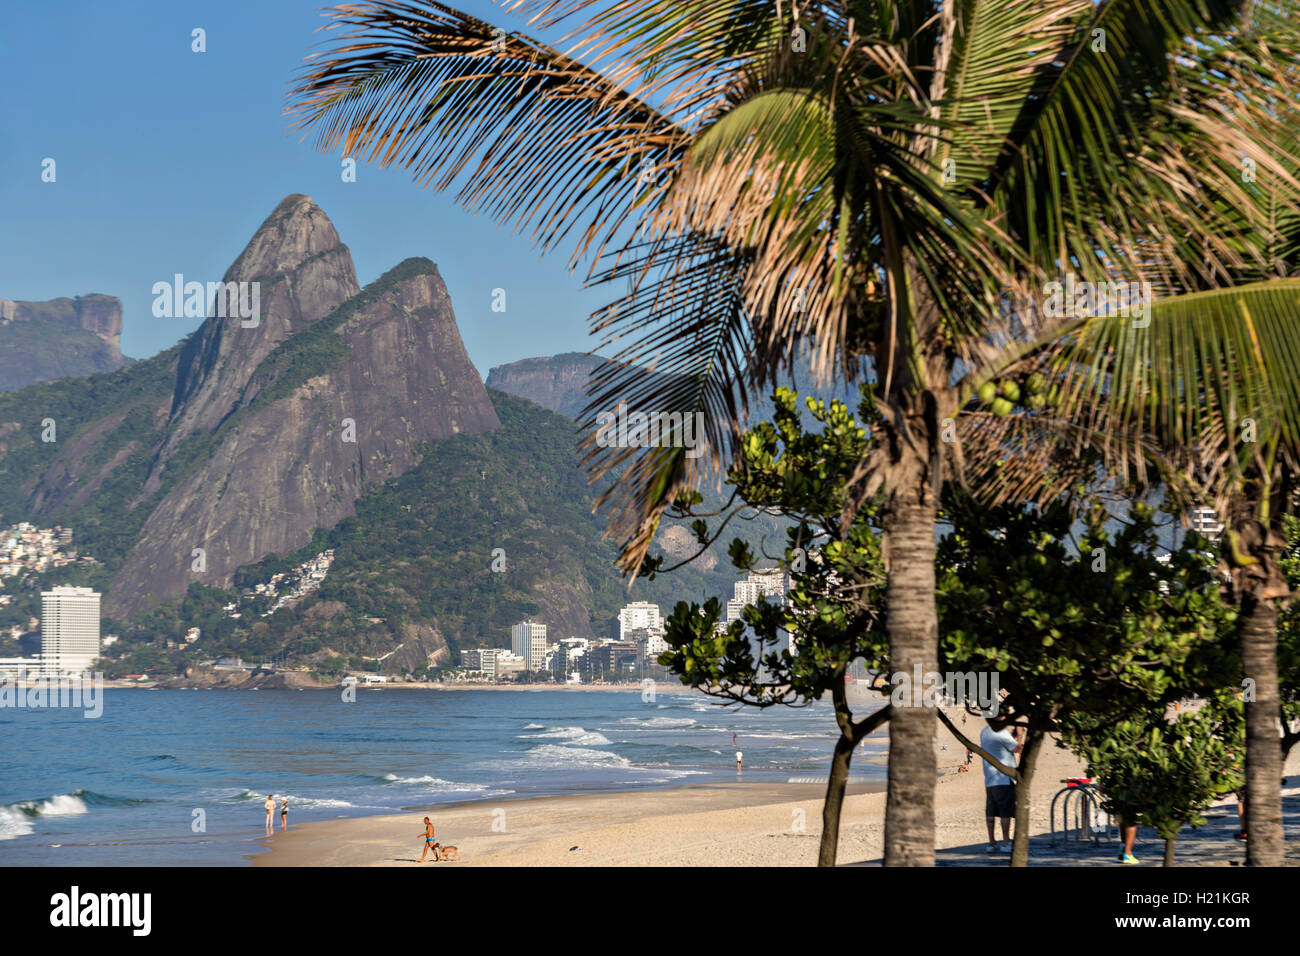 Ipanema beach and Two Brothers Mountain early morning in Rio de Janeiro, Brazil. Stock Photo